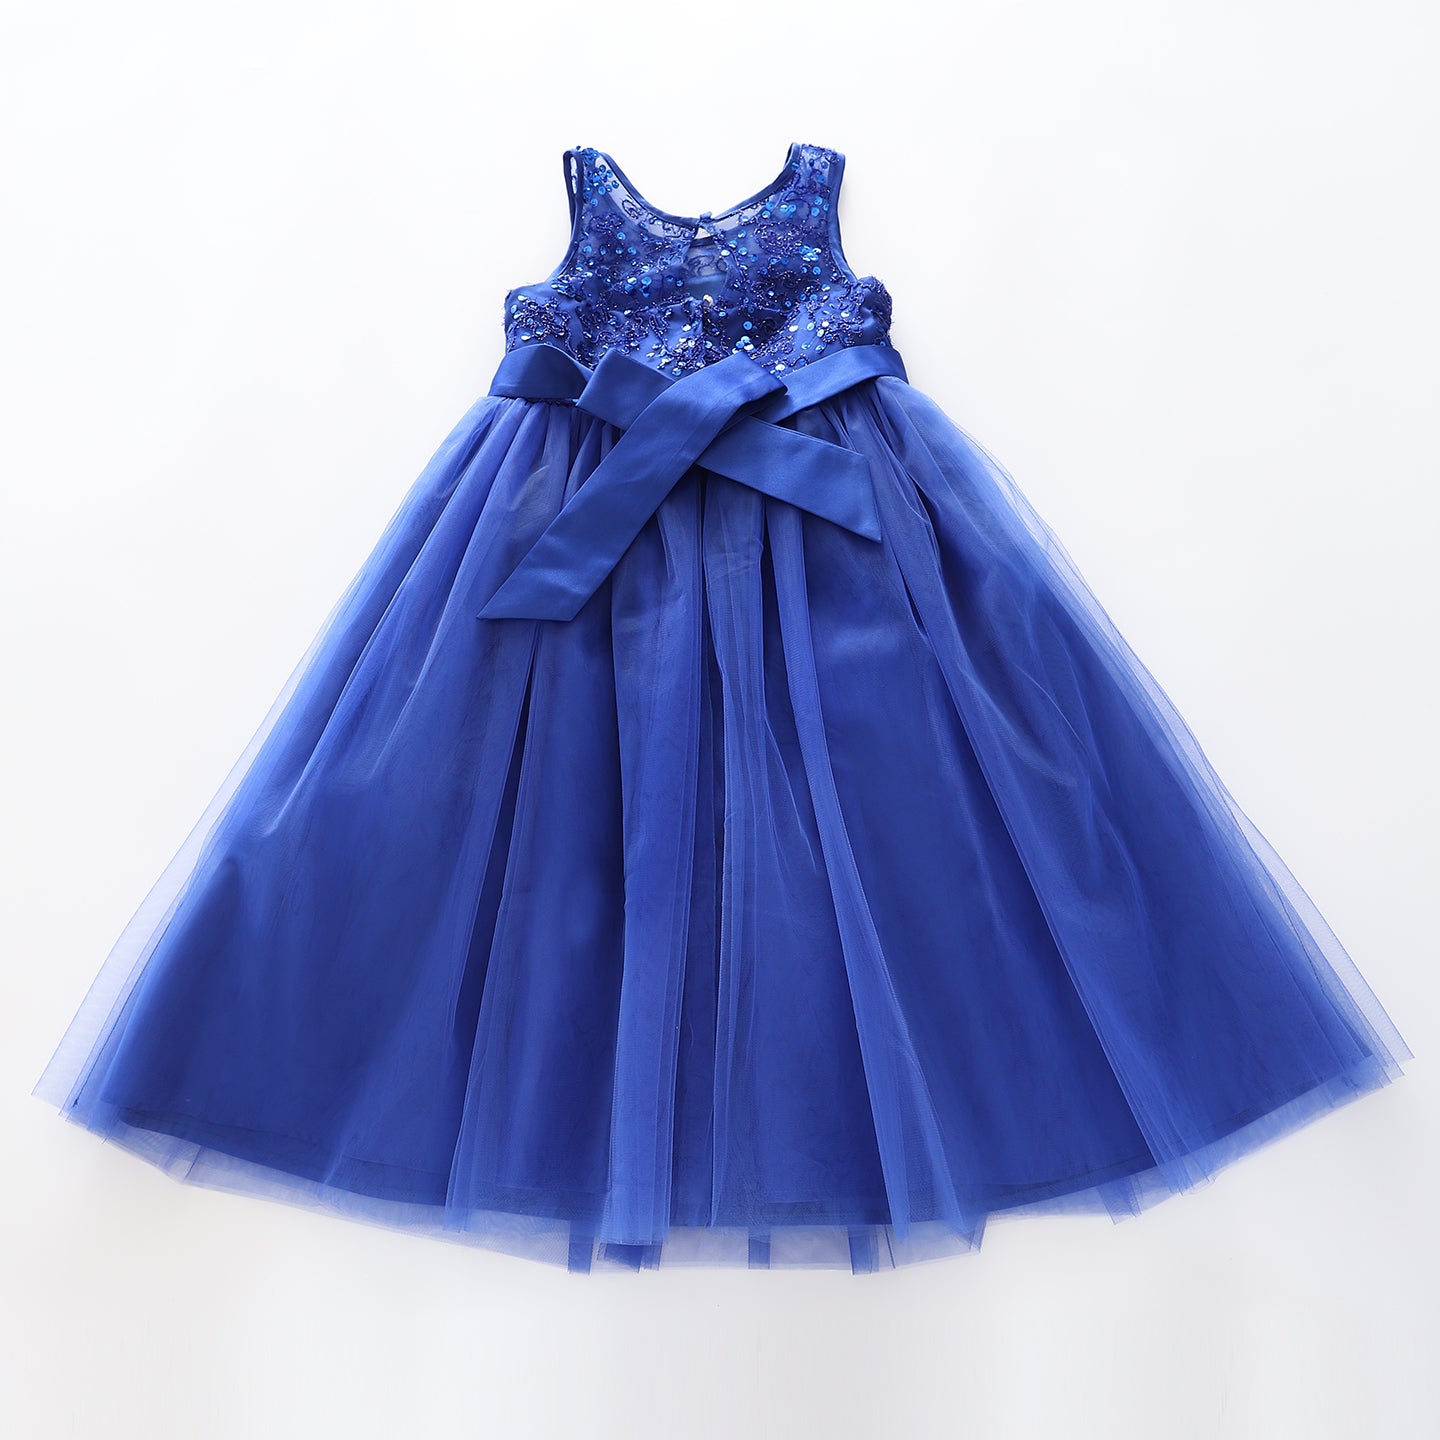 Girls' Royal Blue Special Occasion Gown